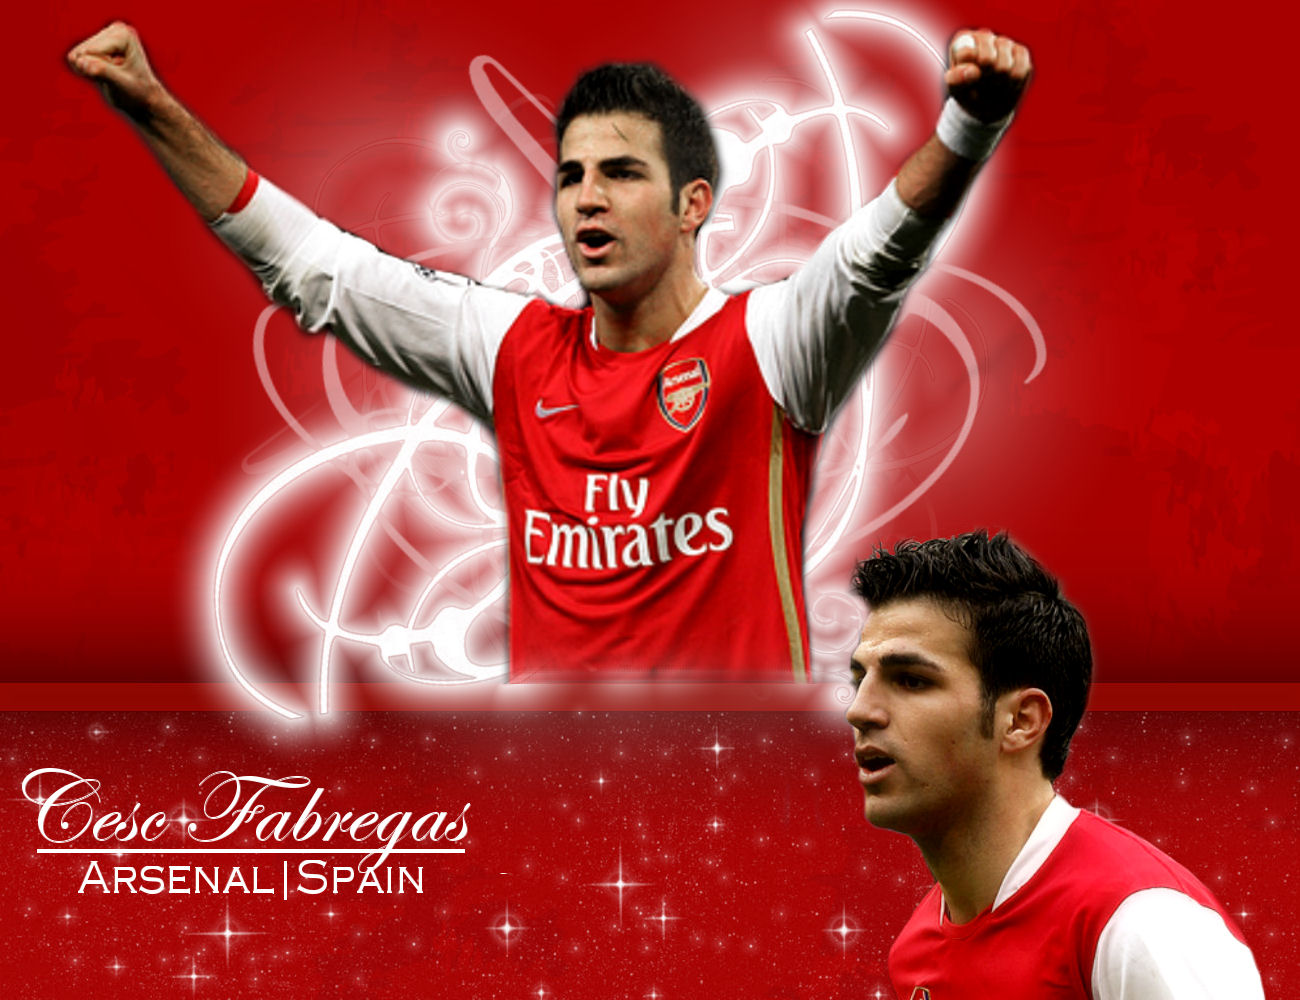  other wallpapers of Cesc Fabregas Wallpaper 2009 as often as possible